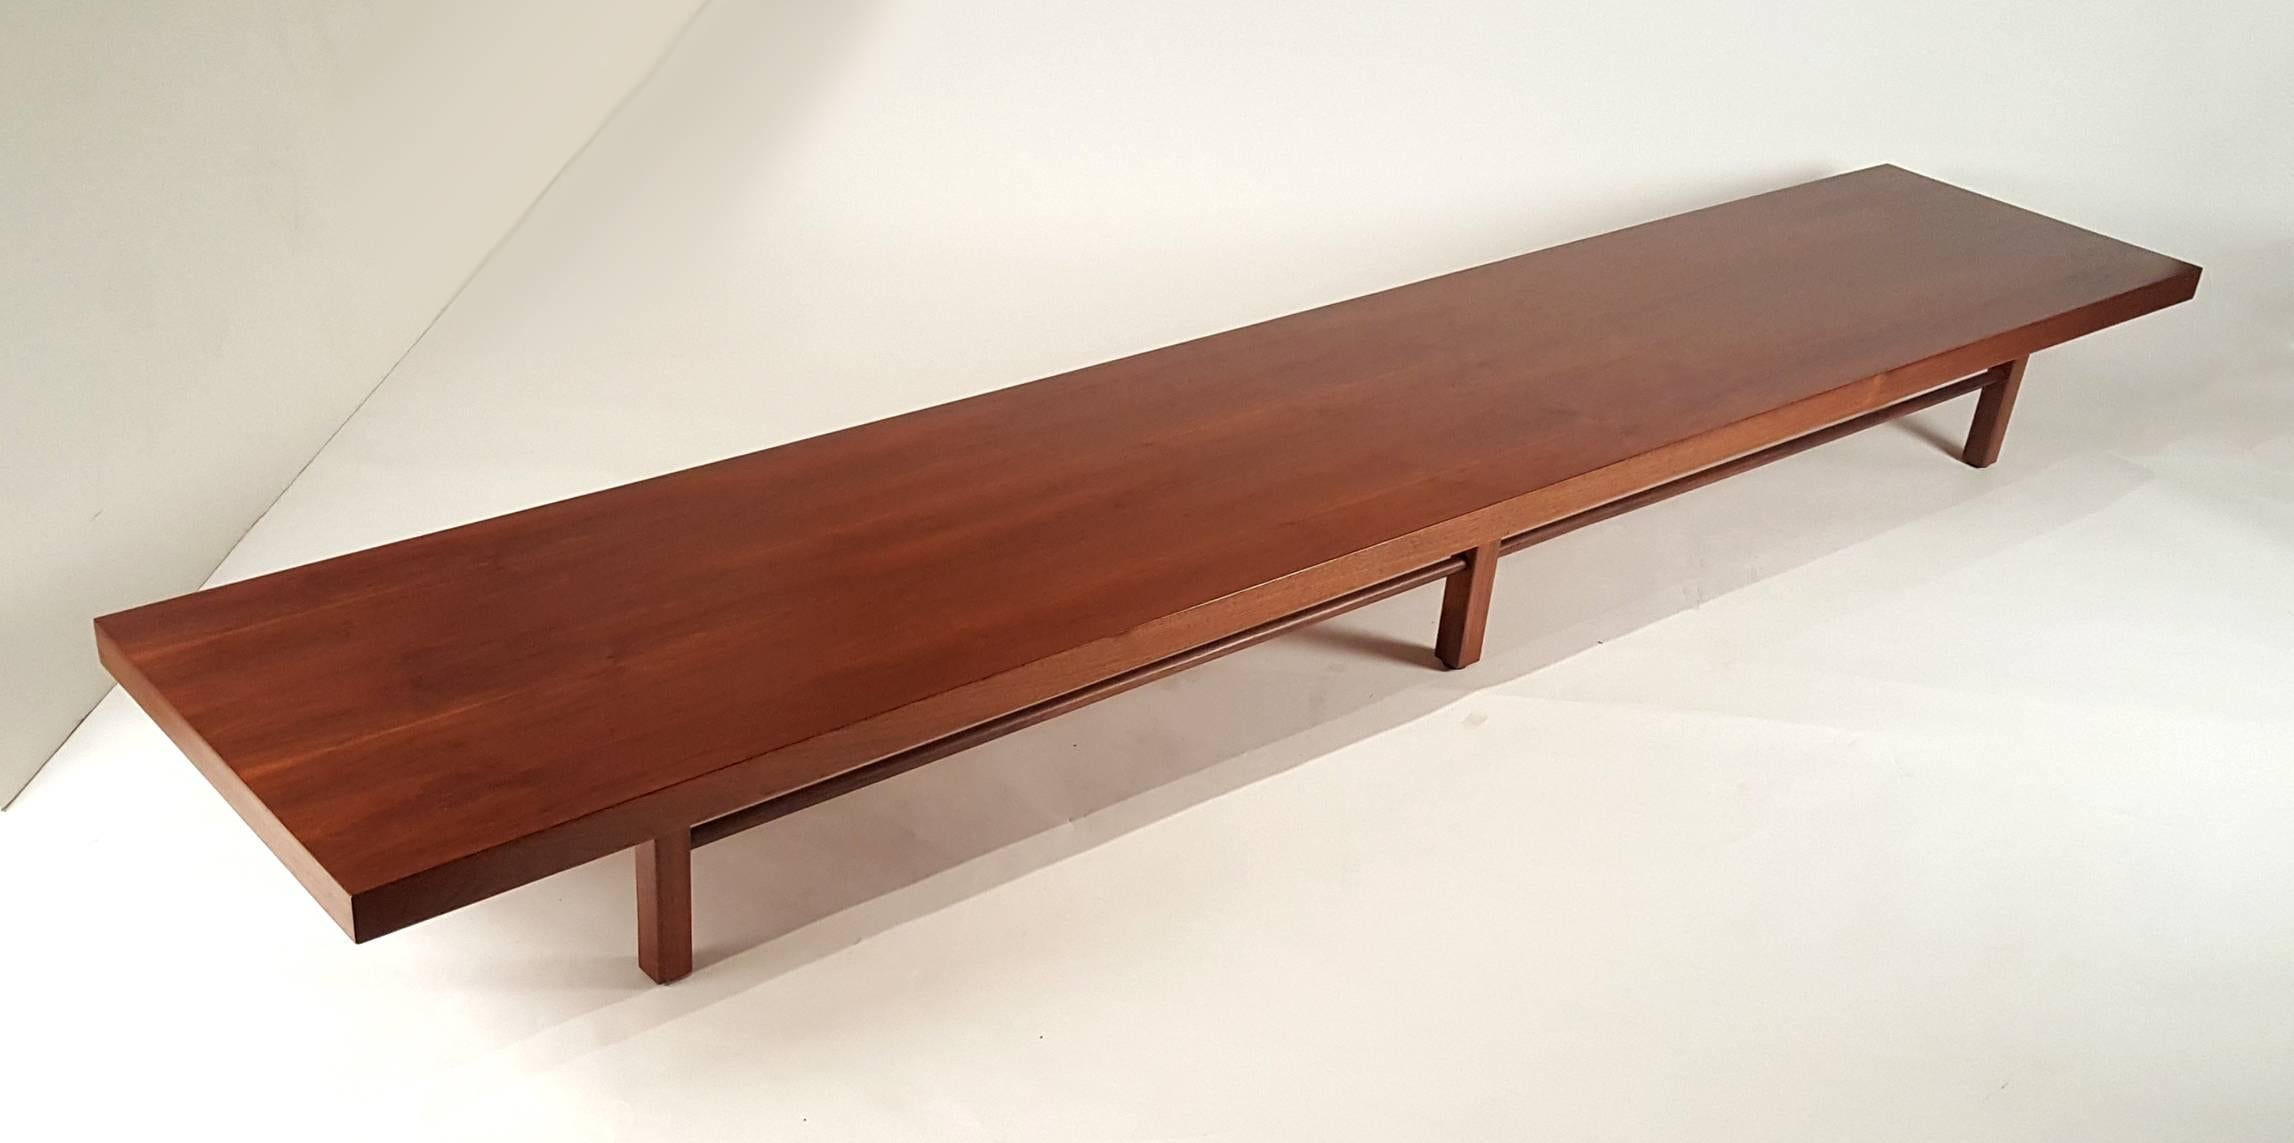 This rare Monumental Milo Baughman table is from his earliest collaboration with Thayer Coggin and retains the original paper label. The sleek, long and low design in the bookmatched walnut is not only visually stunning but also quite versatile. It